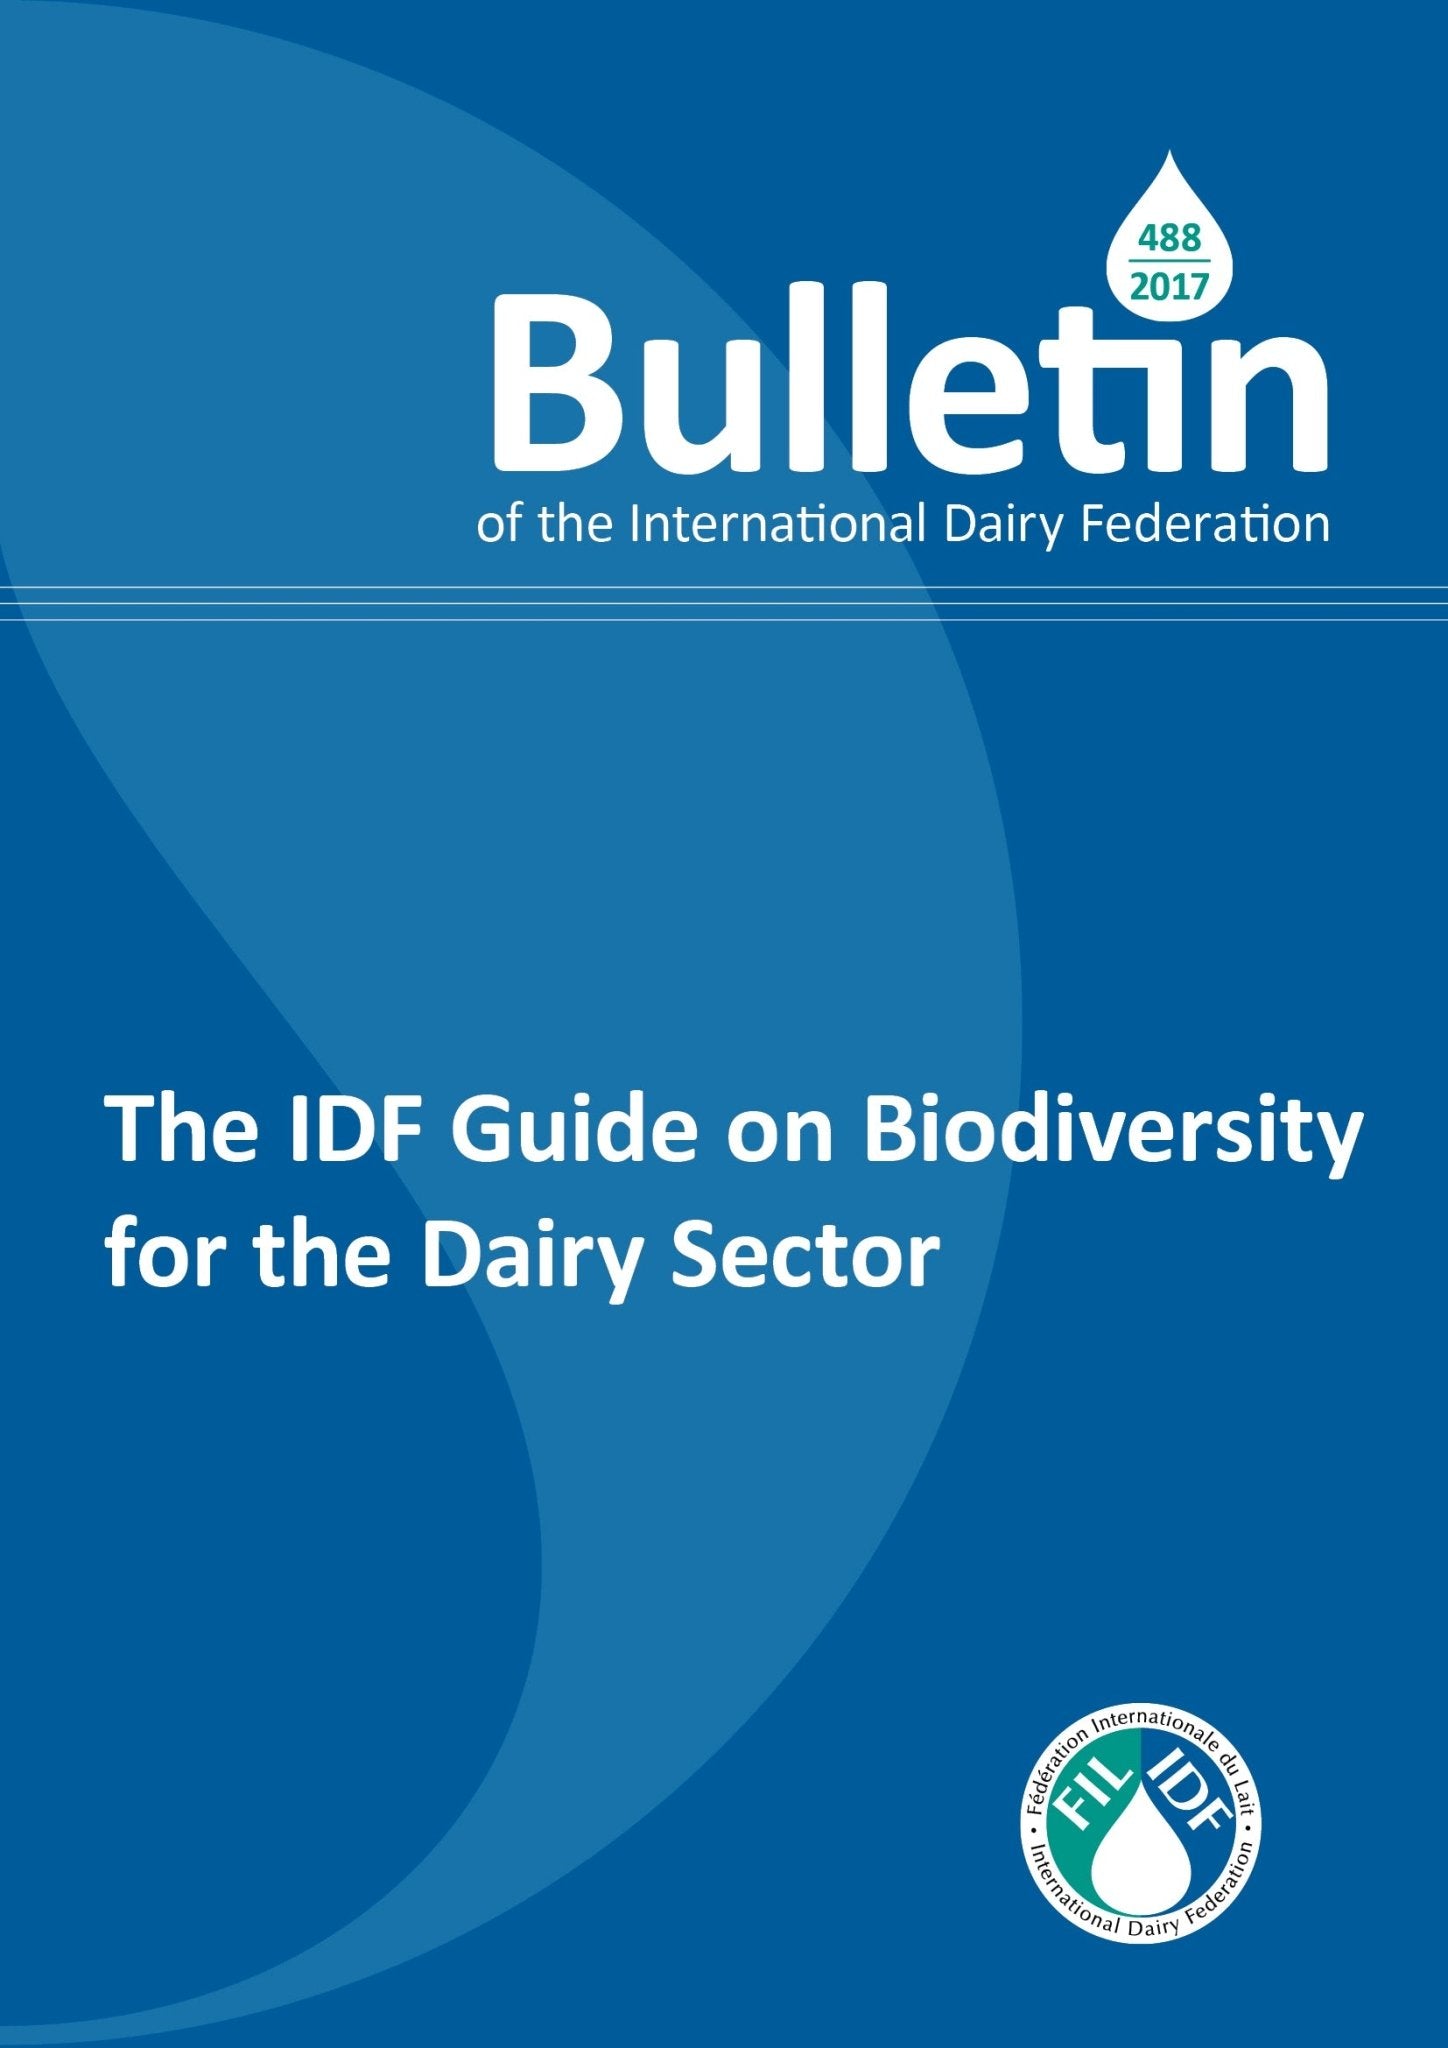 Bulletin of the IDF N° 488/ 2017: The IDF Guide on Biodiversity for the Dairy Sector - FIL-IDF